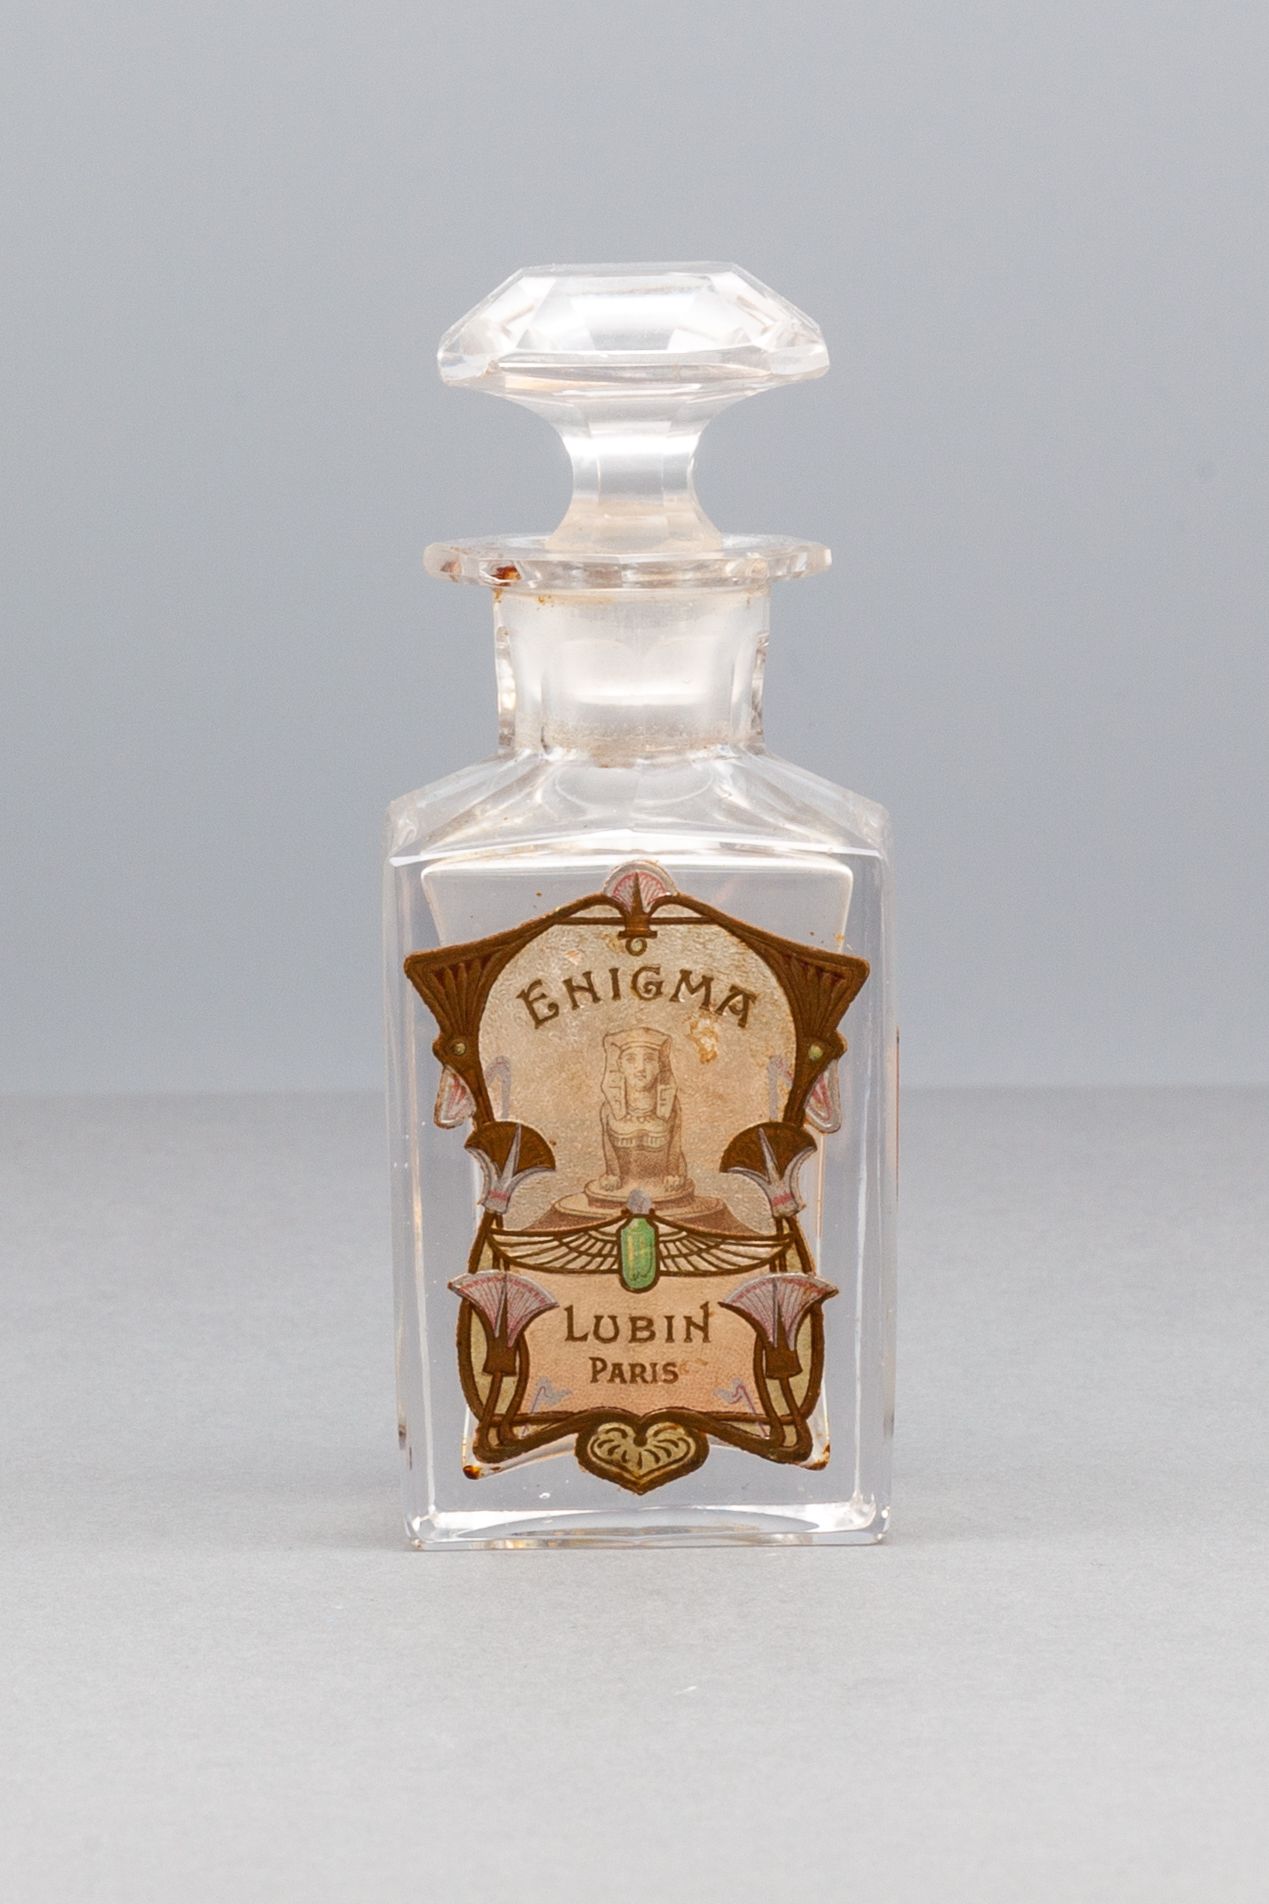 LUBIN "ENIGMA" Bottle in crystal of BACCARAT decorated with its titled label.